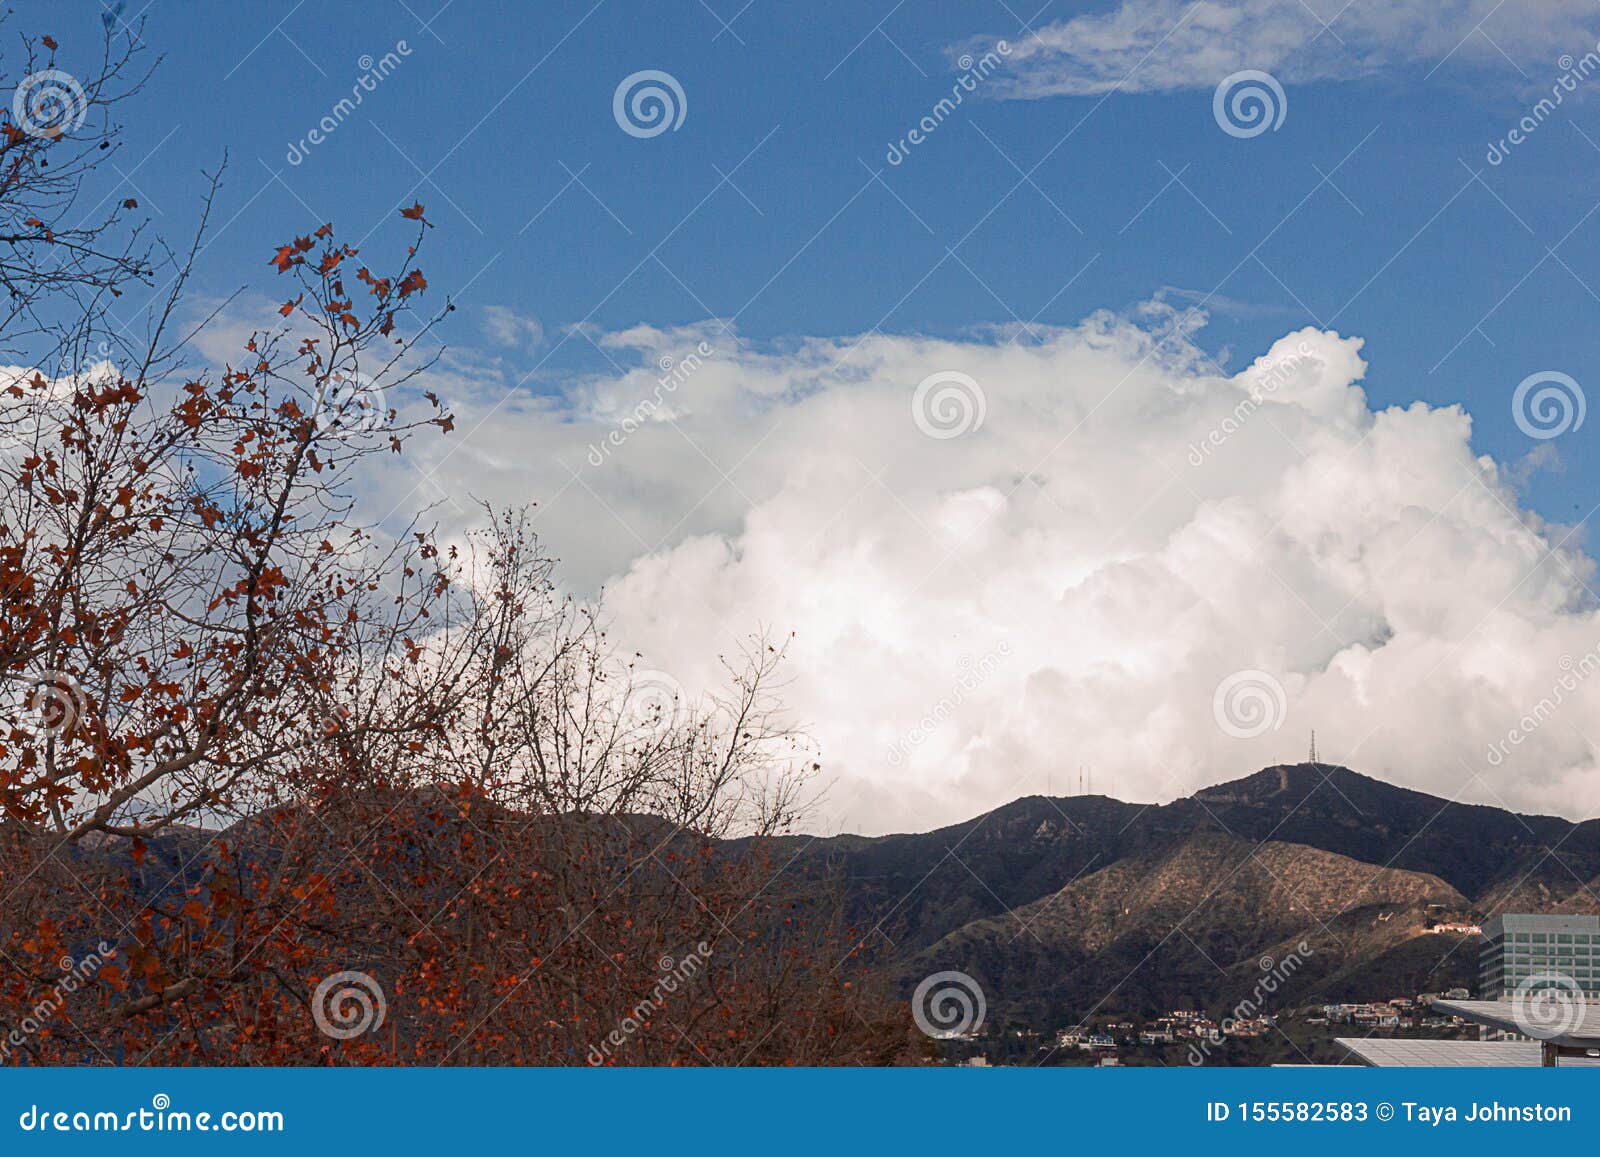 cumulos, nimbus, clouds with angeles crest mountains, buildings, and sycamore tree